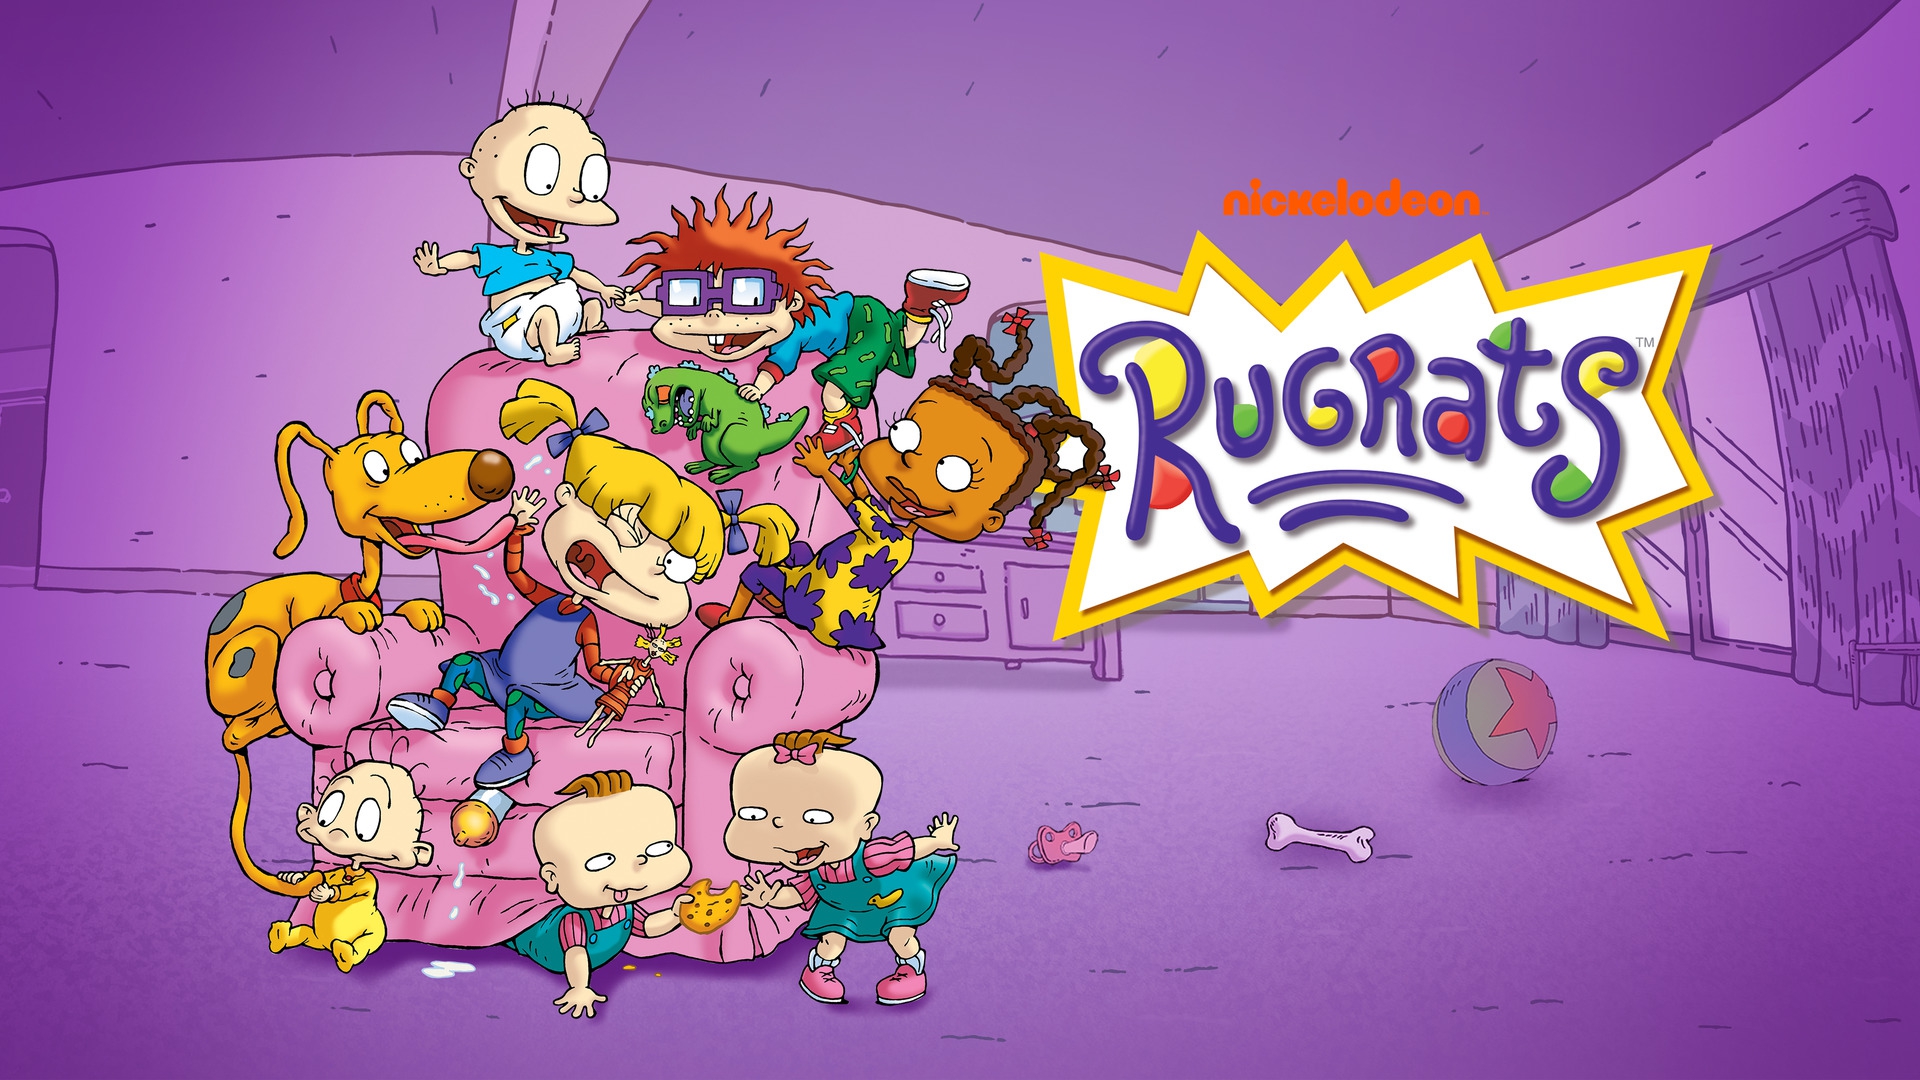 Rugrats Season 1 Episodes Streaming Online Free Trial. 